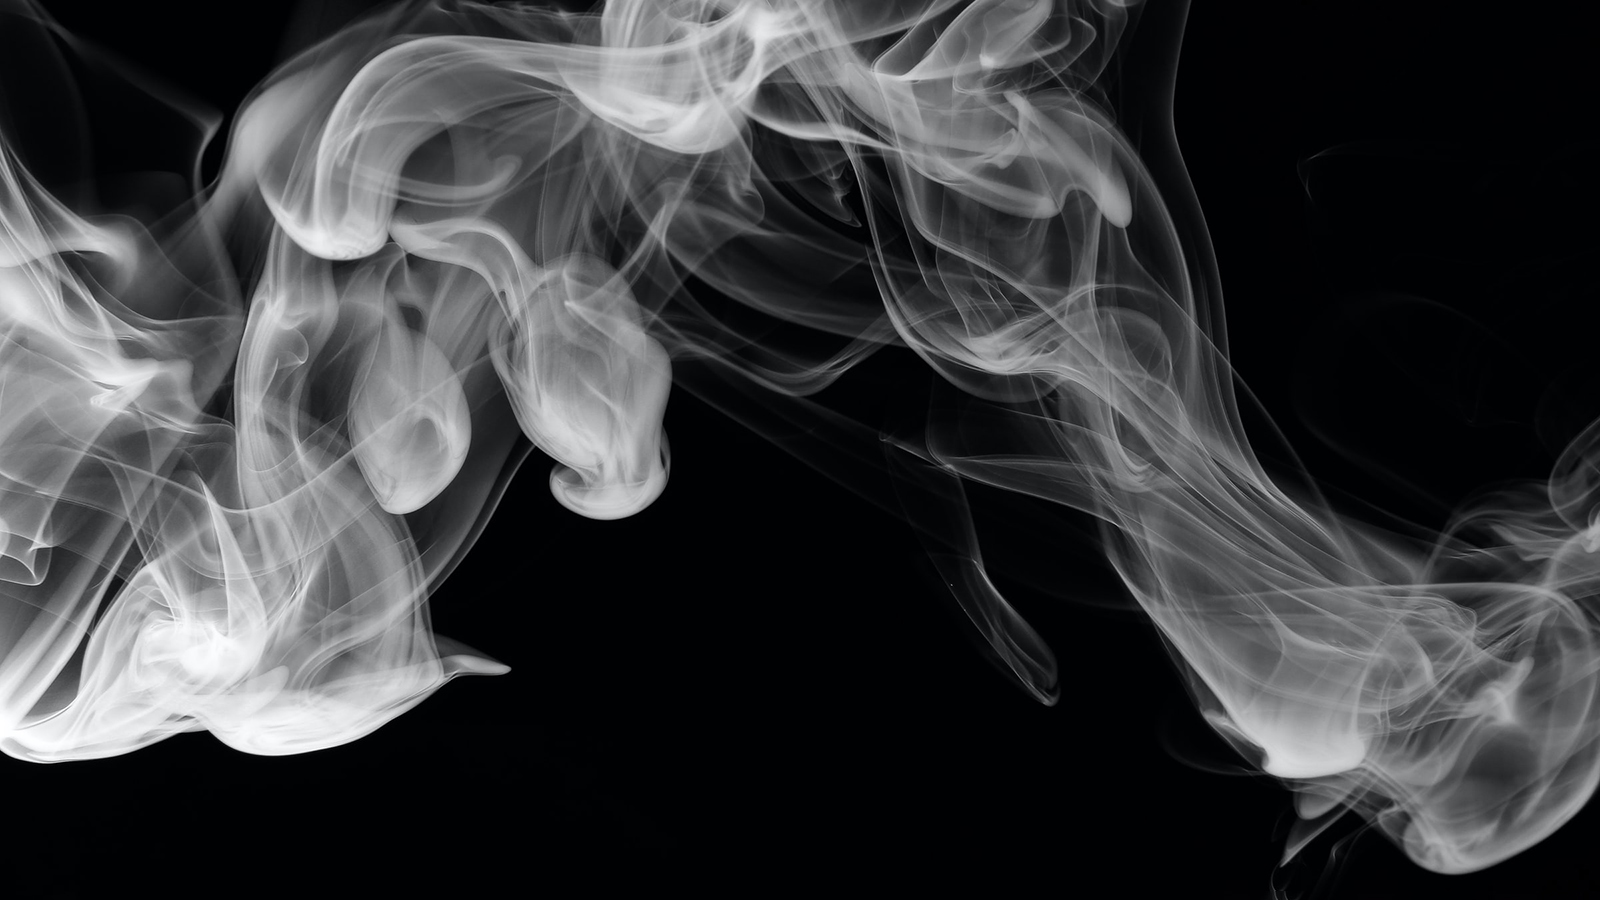 A cloud of smoke against a black background.